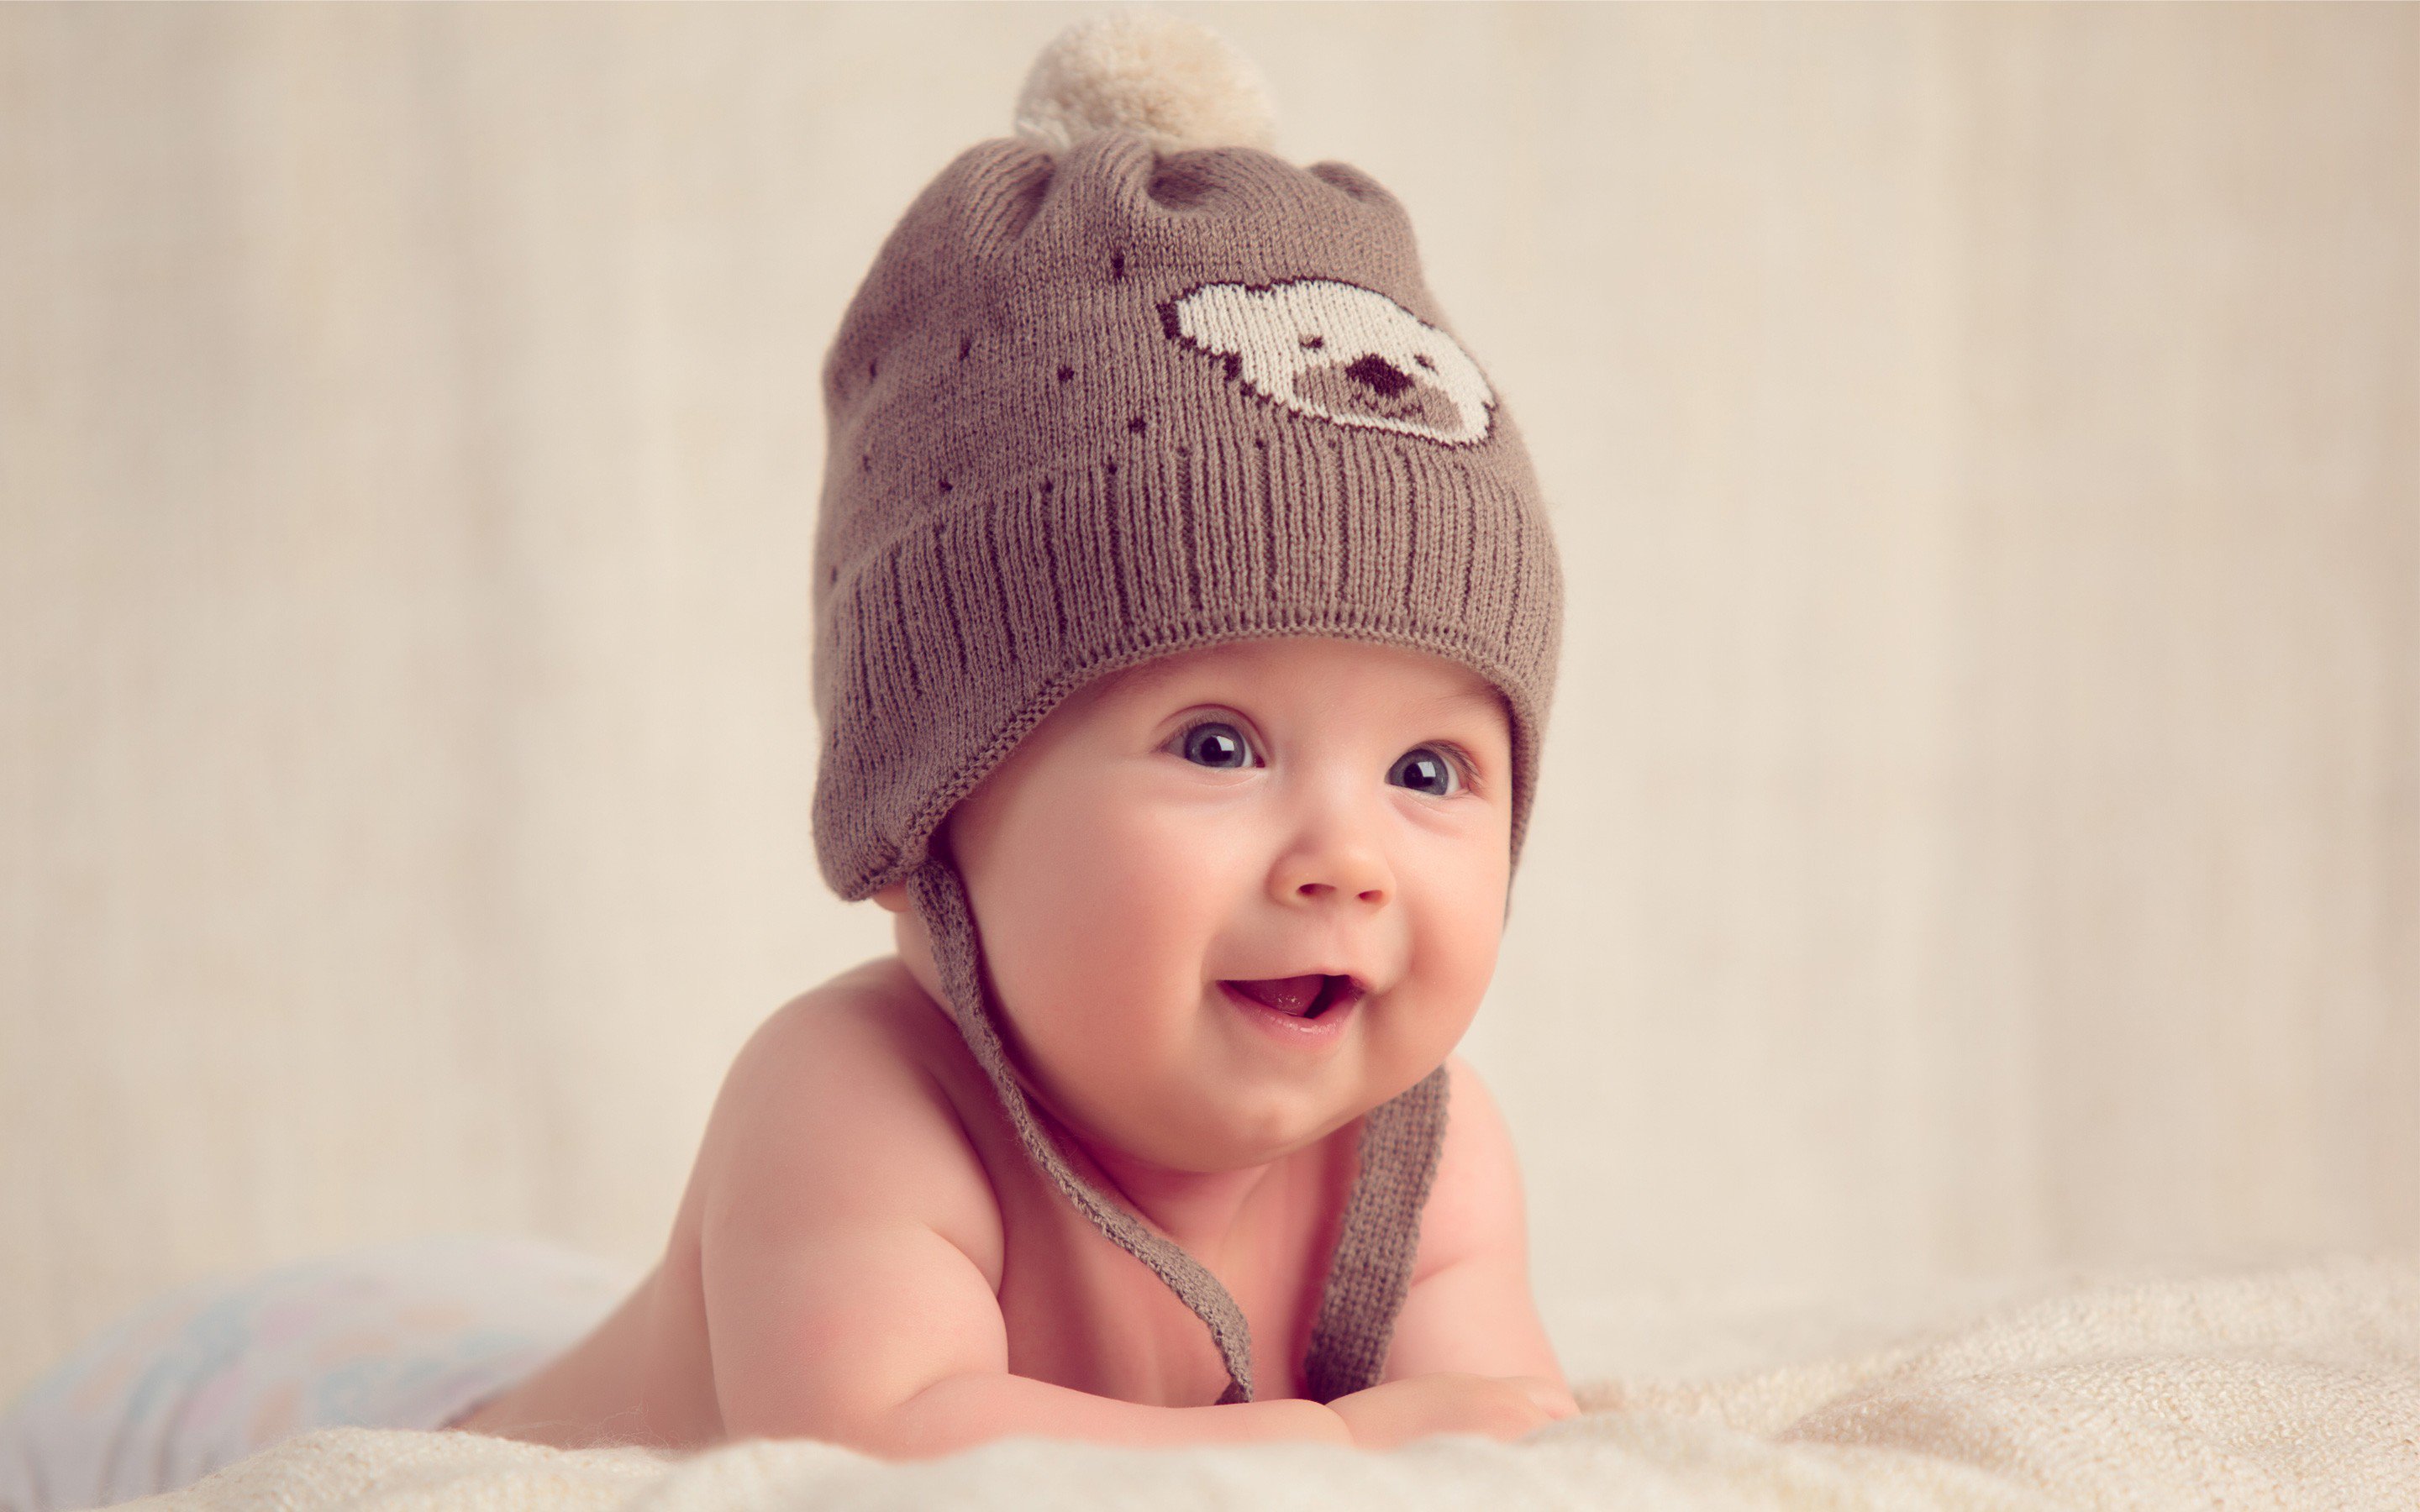 Smiling Baby, HD Cute, 4k Wallpapers, Images, Backgrounds, Photos and  Pictures